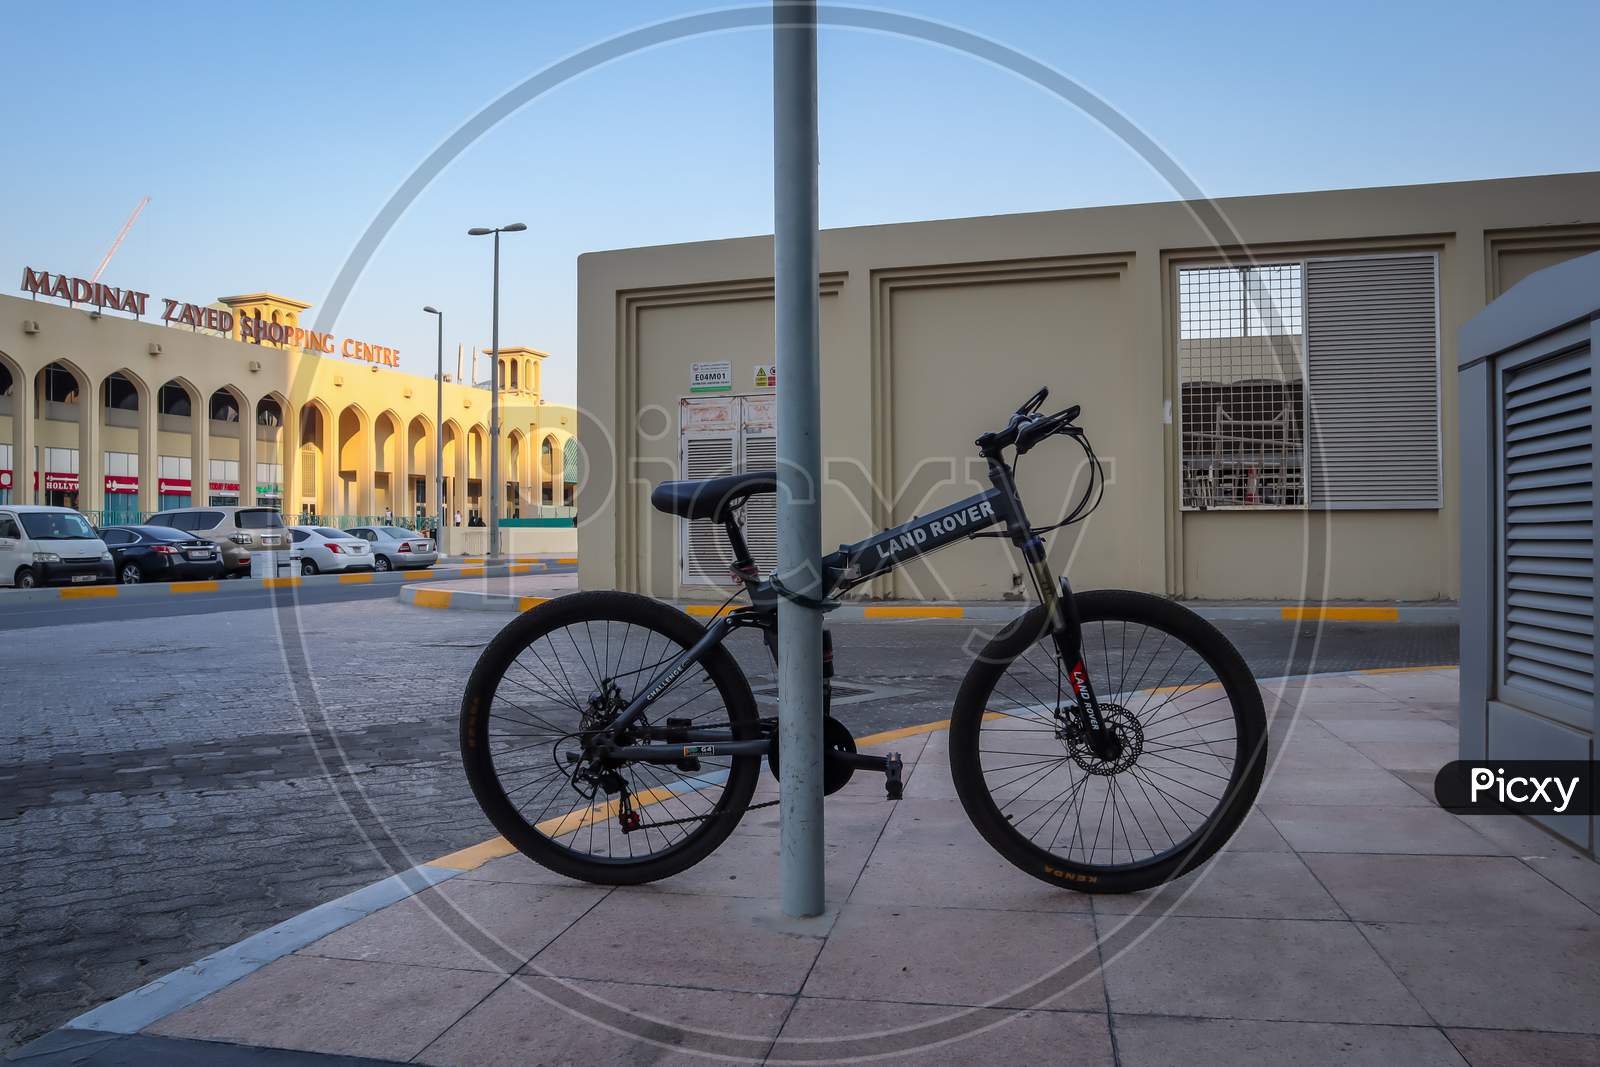 Abu Dhabi - 8 September 2020, A Black Land Rover Bicycle Is Parking In The Middle Of The City, Uae